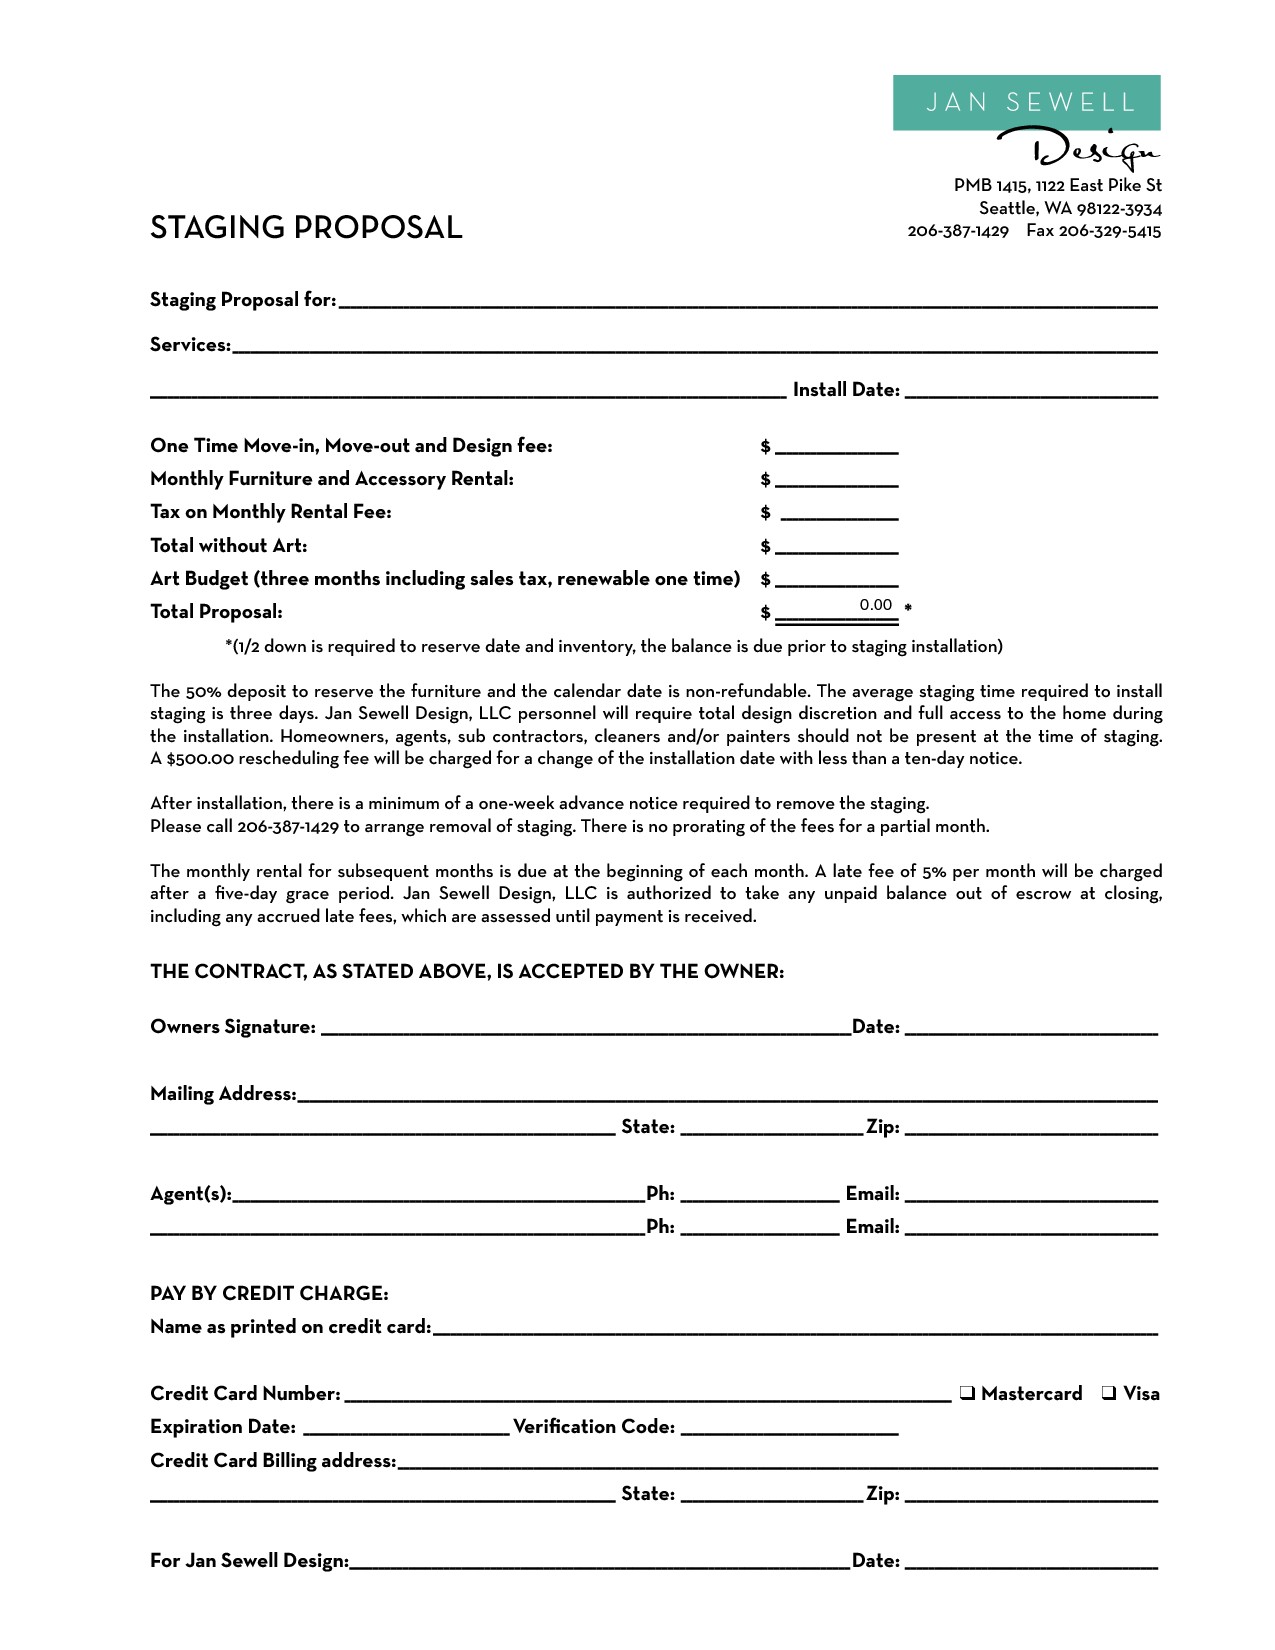 Home Staging Contract Template Bing Images STG In 2018